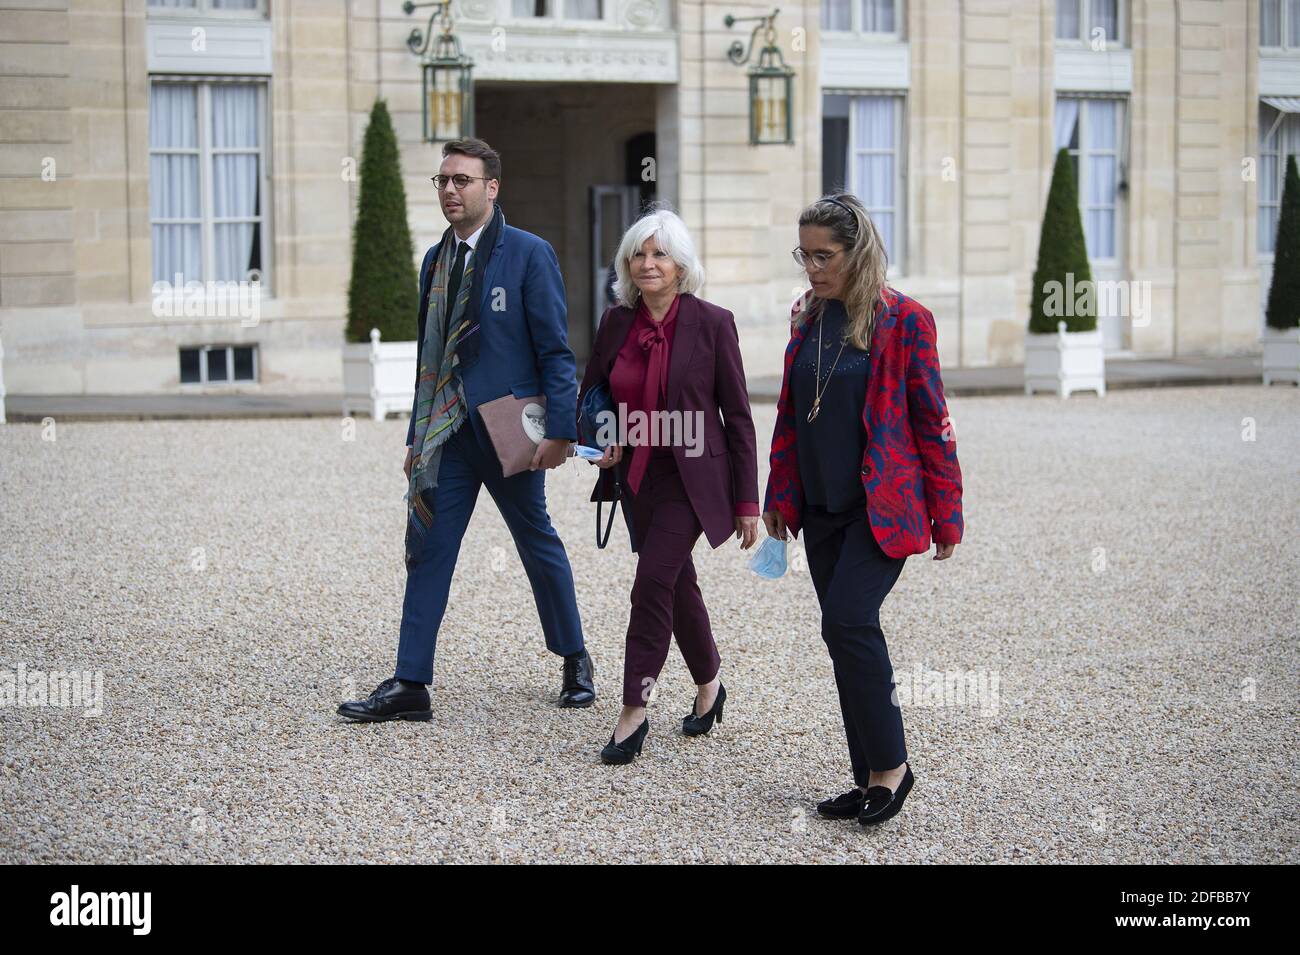 Laurence Tubiana arriving to take part in a meeting between French president and the 150 members of the Citizen's Convention on Climate Change at the Elysee Palace on june 29, 2020, in Paris, France. Photo by Eliot Blondet/ABACAPRESS.COM Stock Photo